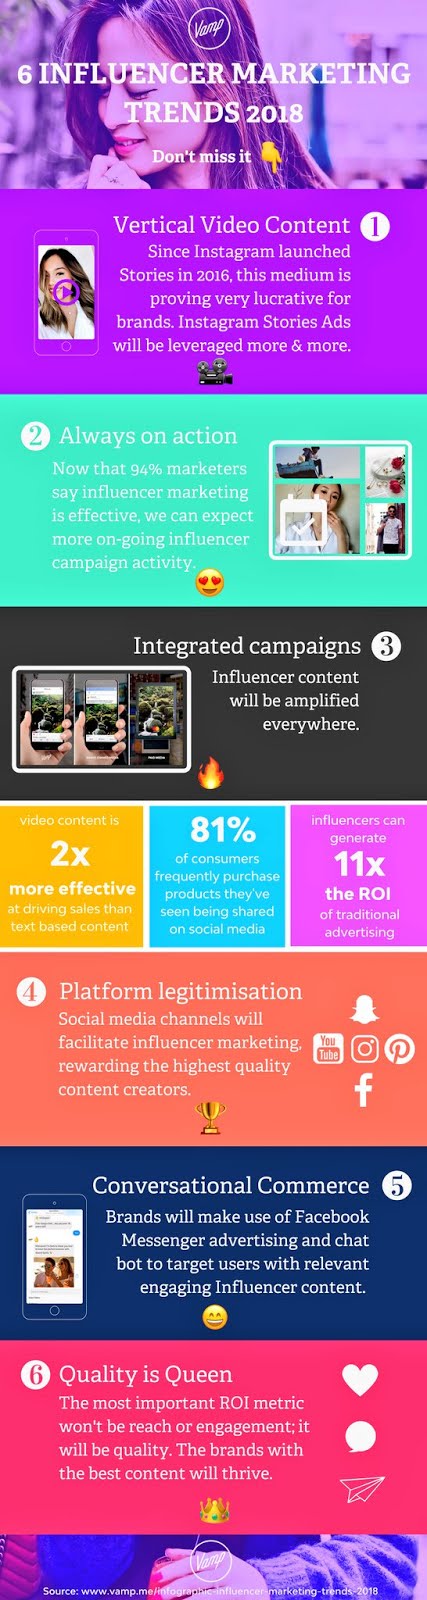 8 influencer #marketing trends in 2018